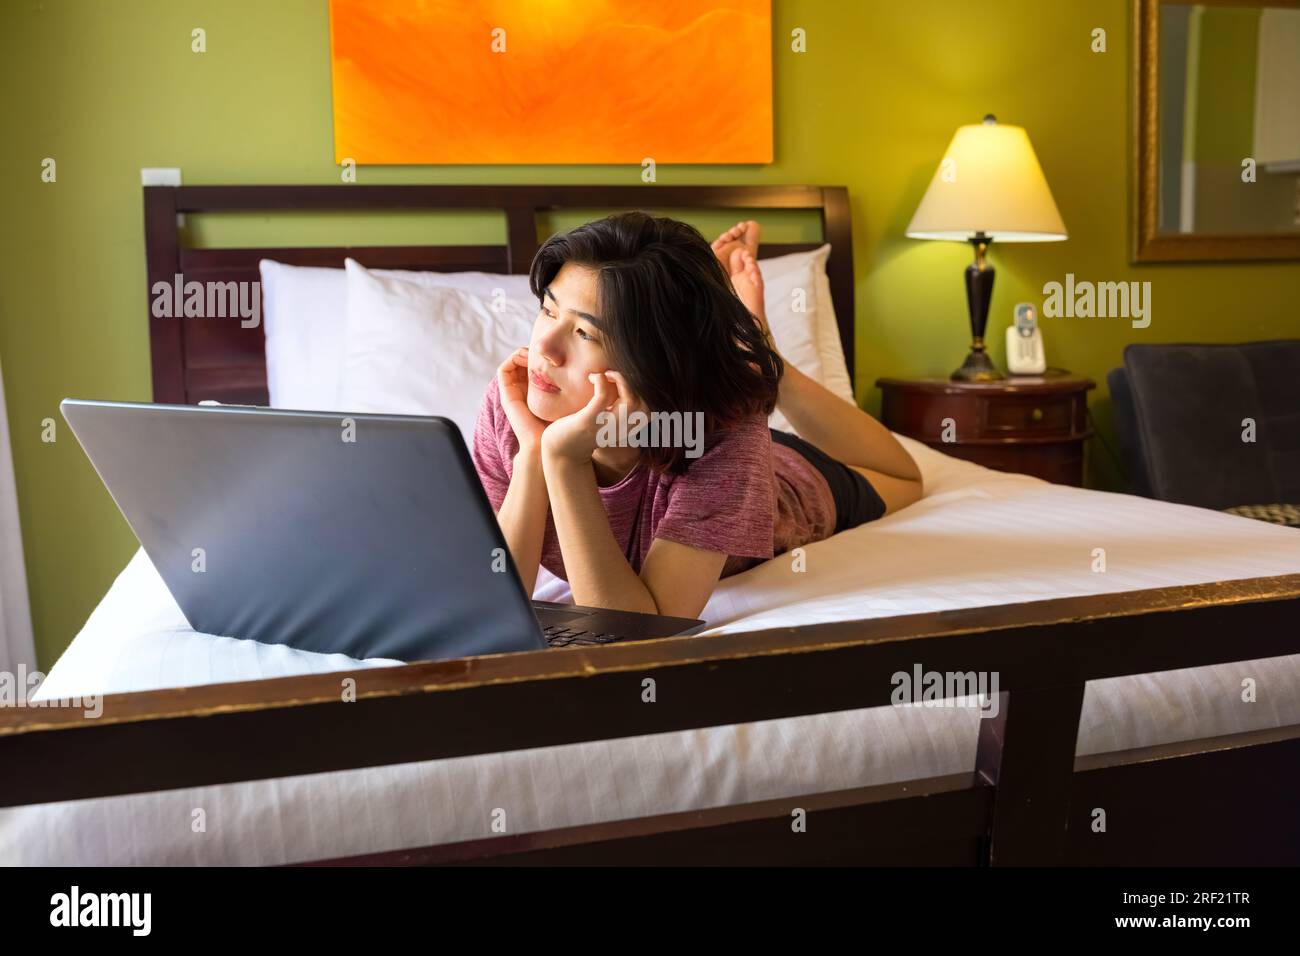 Young woman or teen lying down on bed using laptop computer, looking off to side bored or thinking Stock Photo